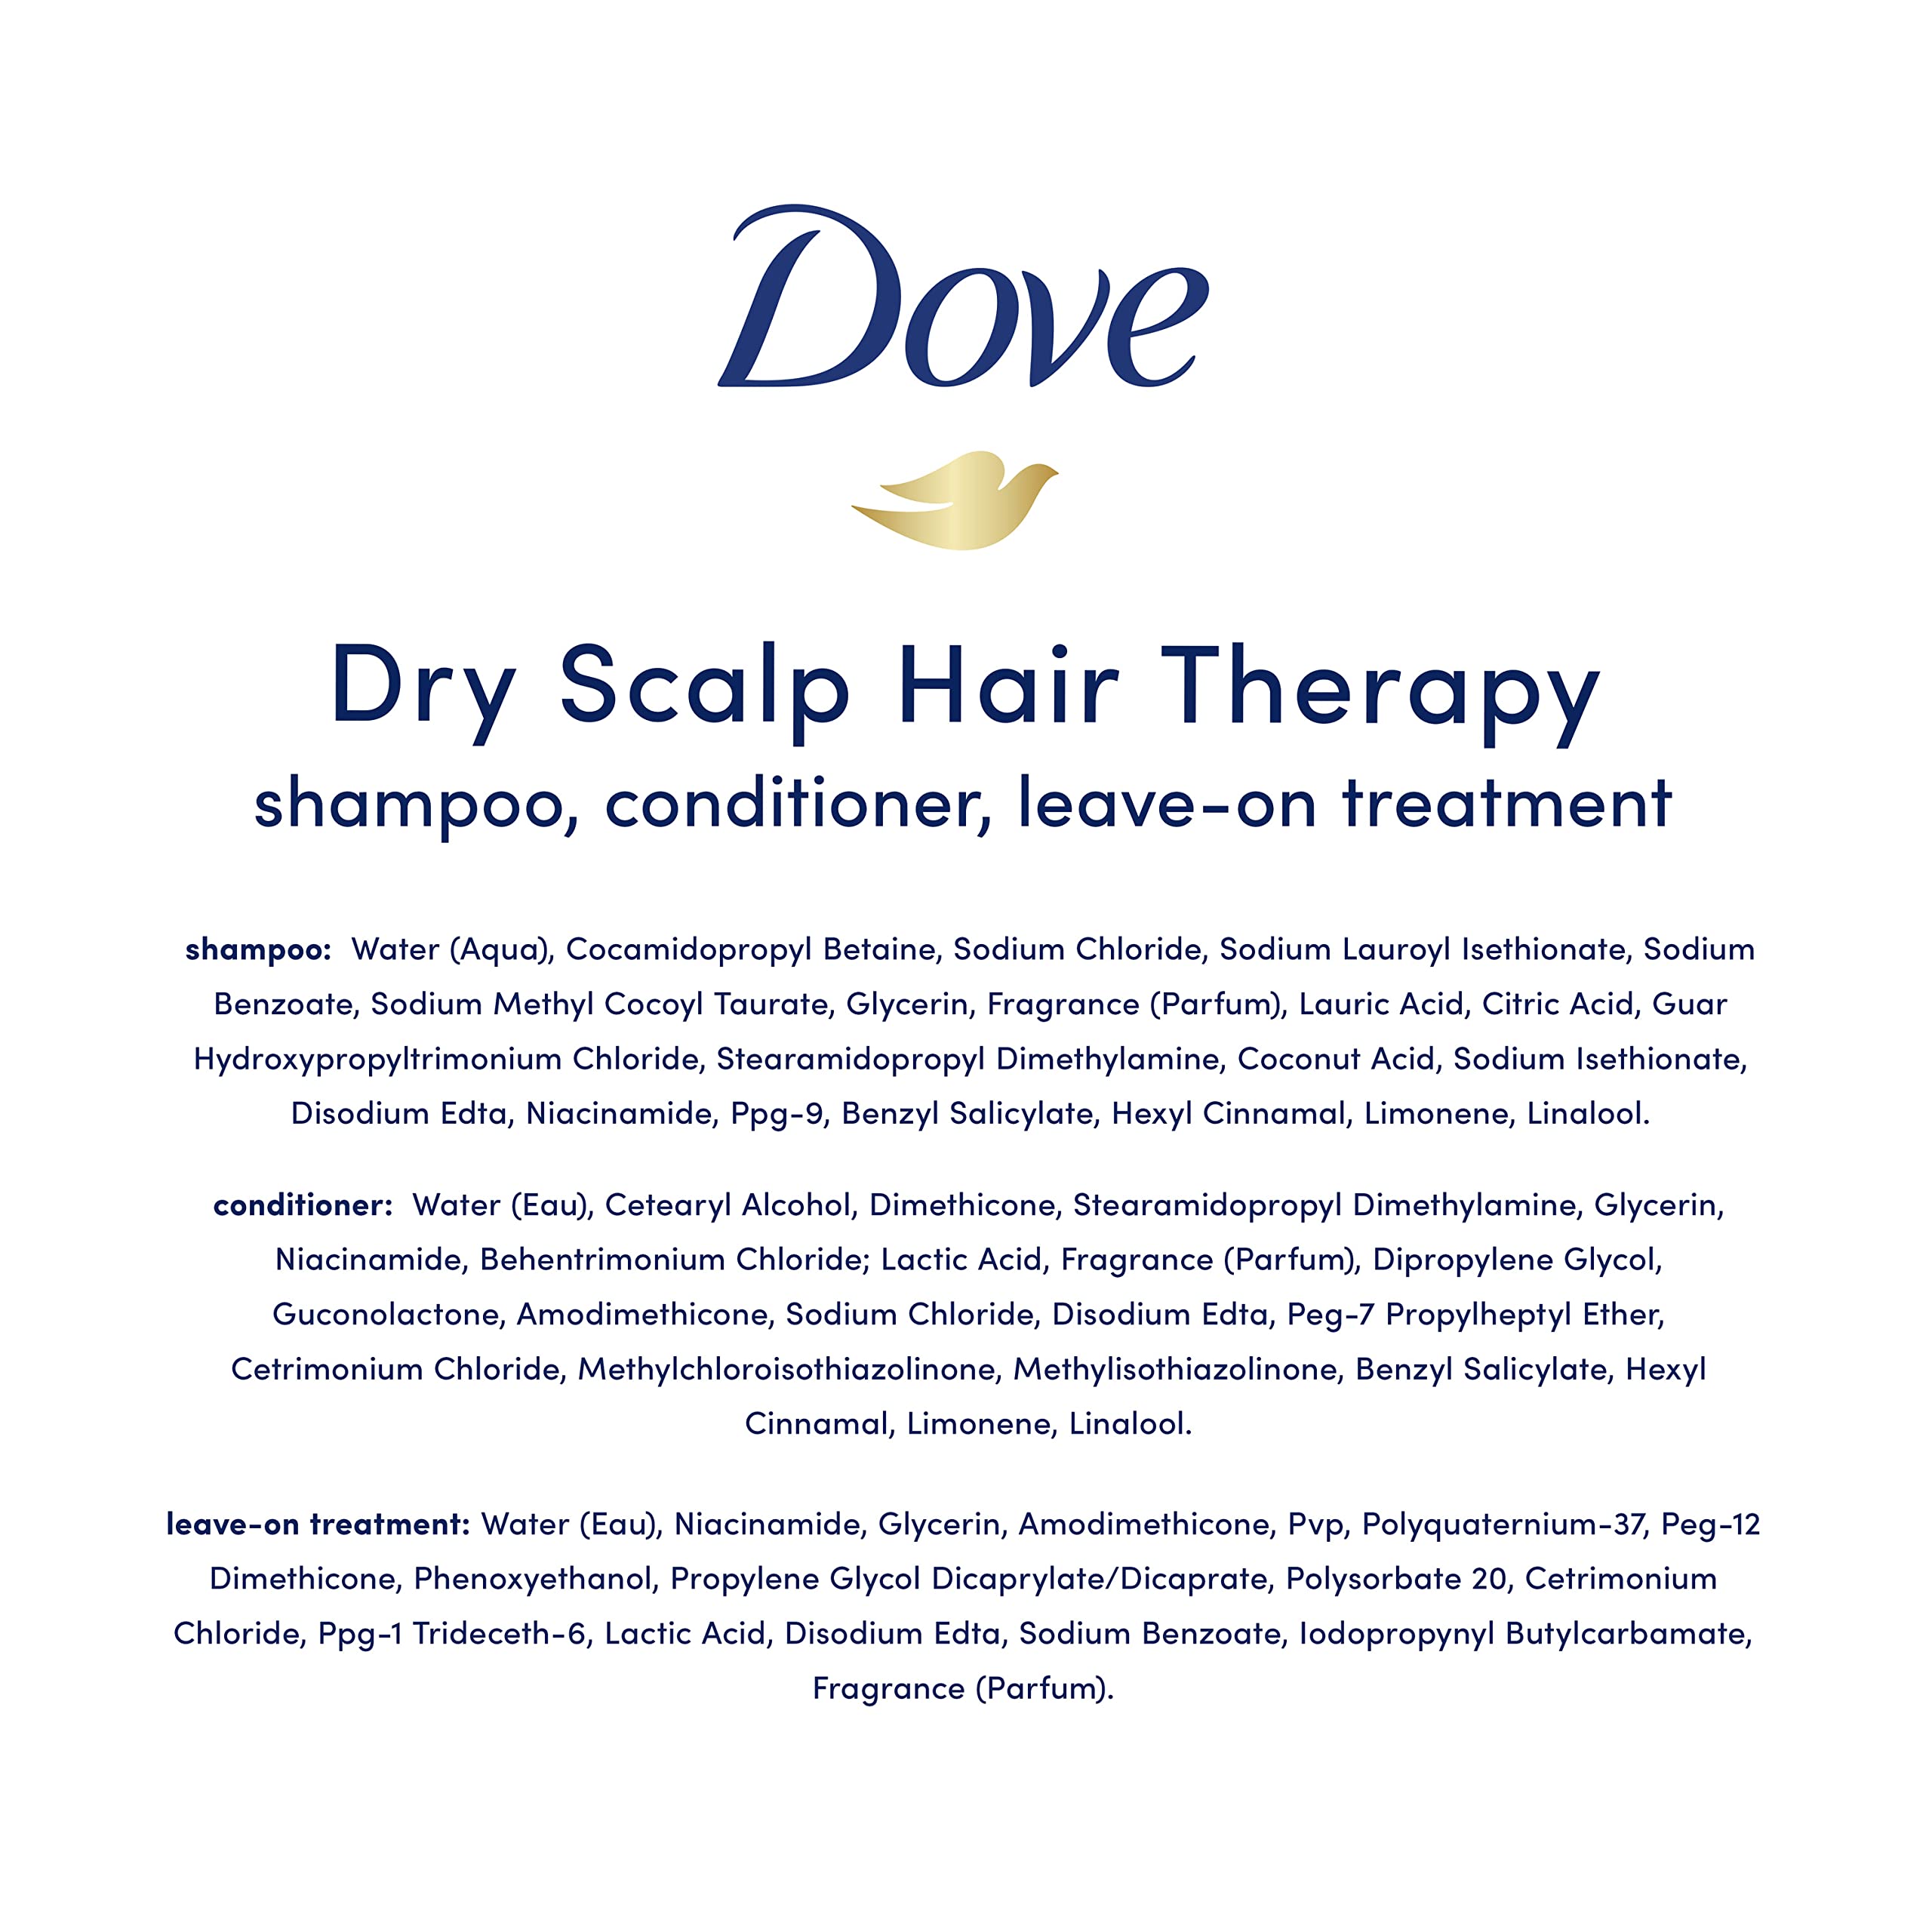 Dove Hair Therapy Regimen Hair Set Shampoo, Conditioner and Leave-On Scalp Treatment for Dry Scalp with Vitamin B3